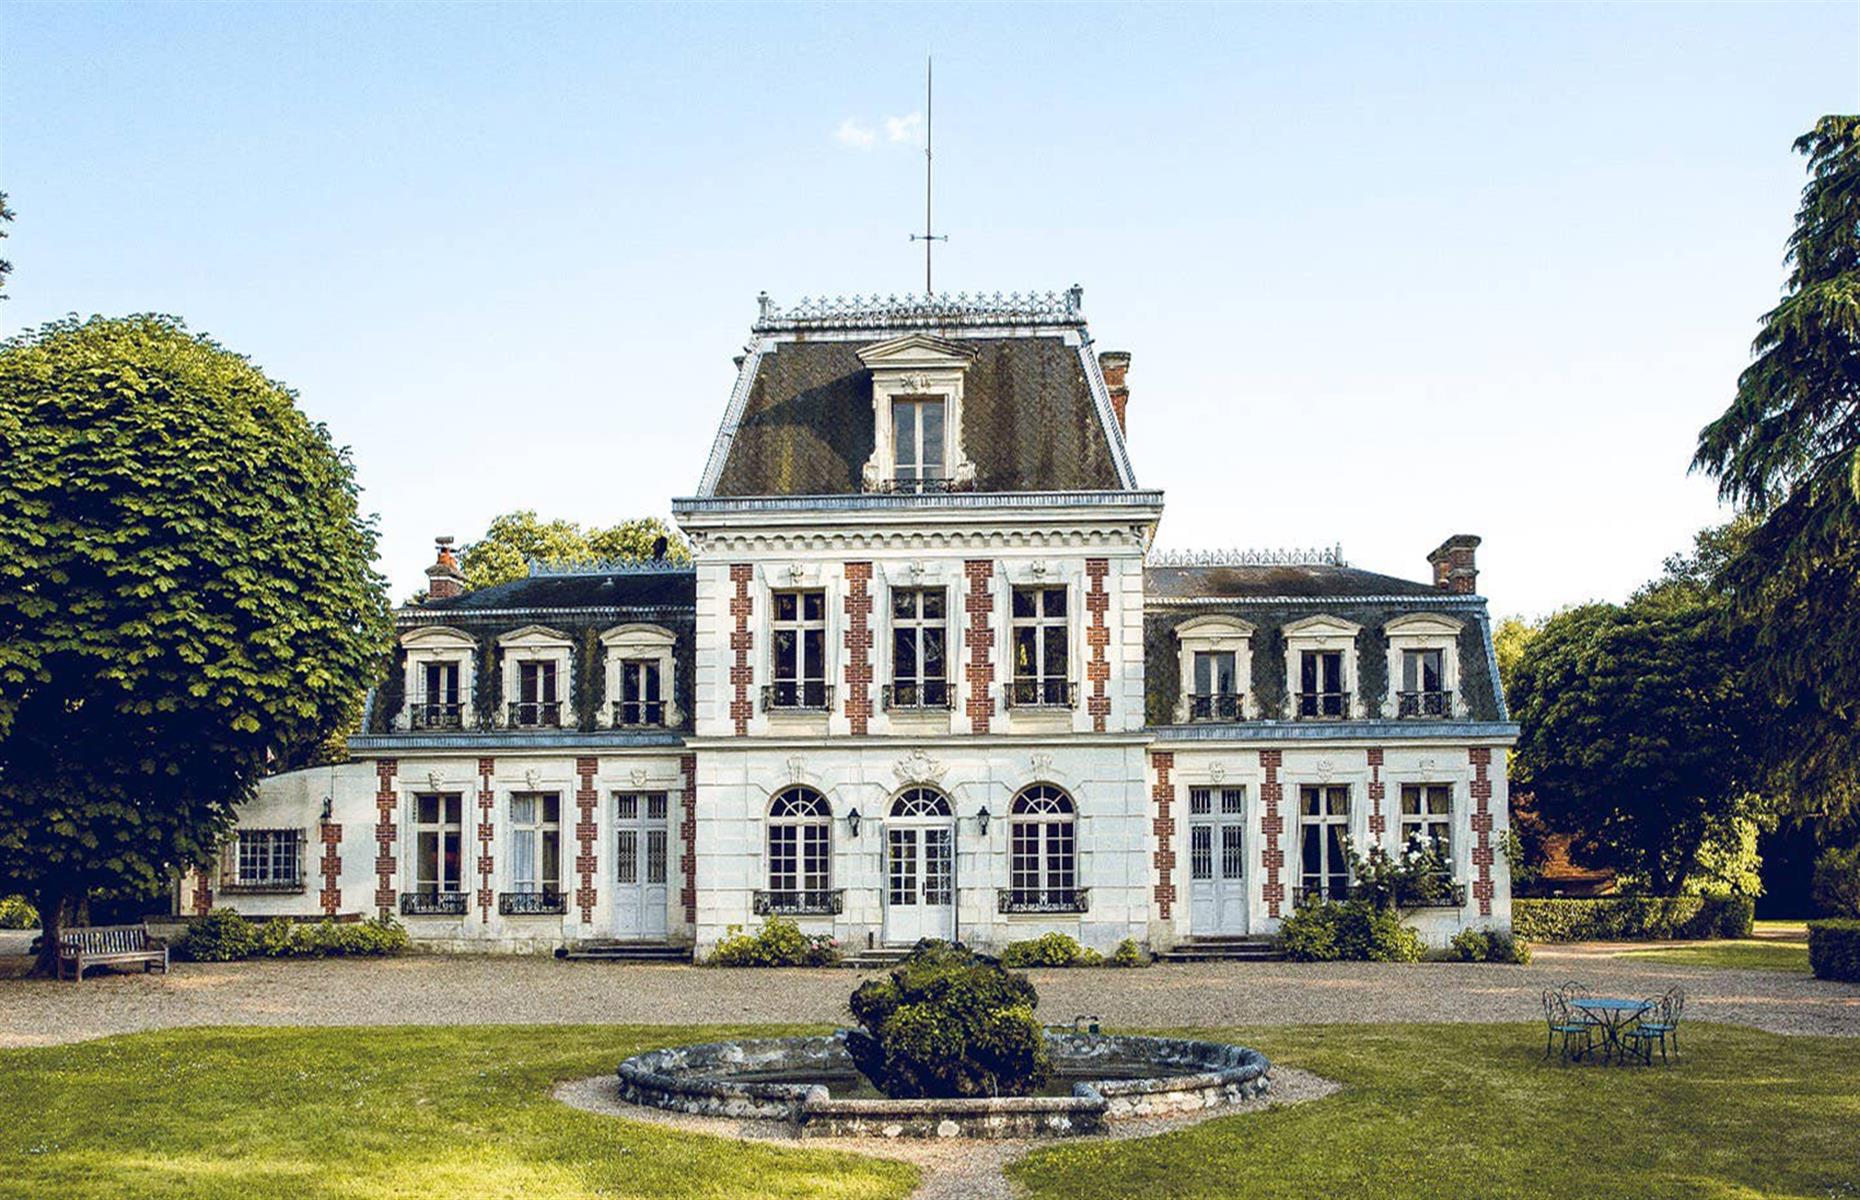 <p>A two-hour drive from Paris, <a href="https://www.airbnb.co.uk/rooms/9859896">this seven-bedroom storybook château</a> in the Loire Valley offers modern amenities combined with regal interiors, an outdoor pool and great countryside location. There's no need to completely shut the world out if guests do fancy getting out and about – Château de Chenonceau and Beauval Zoo are both nearby.</p>